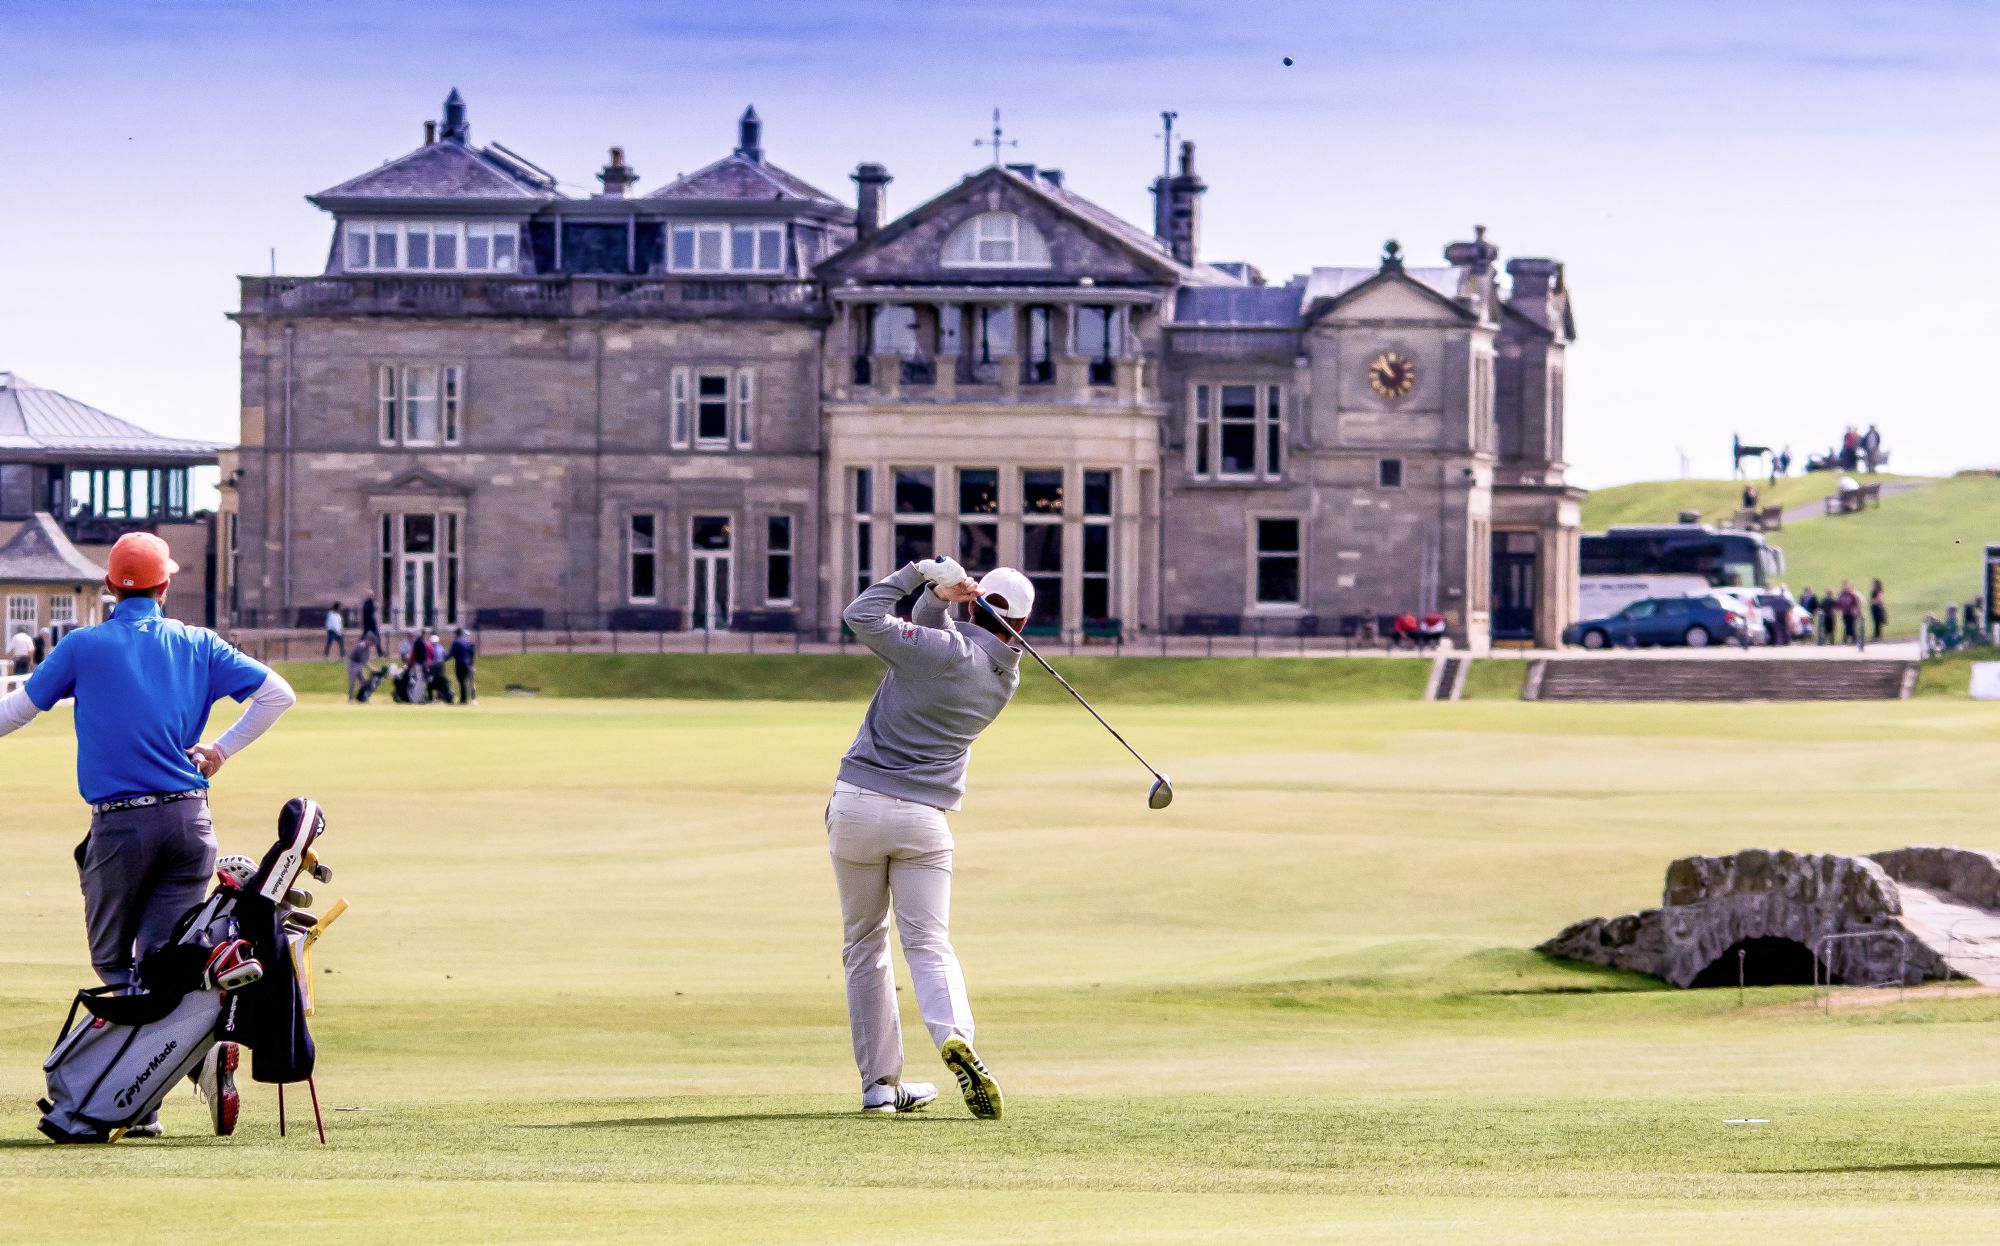 University of St Andrews' Golf Scholar putting on the 17th green on the Old Course